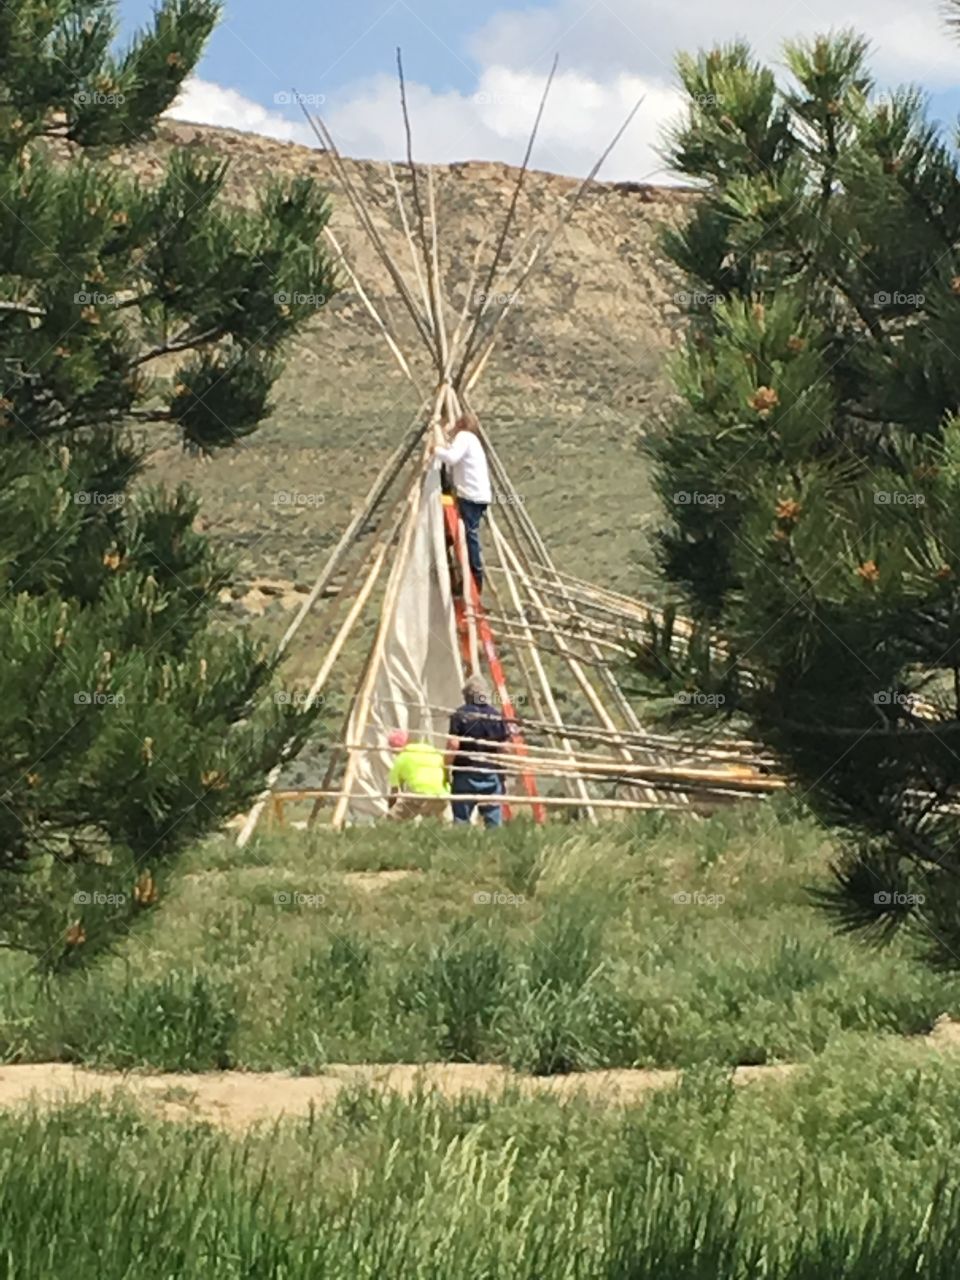 Setting up the tepee